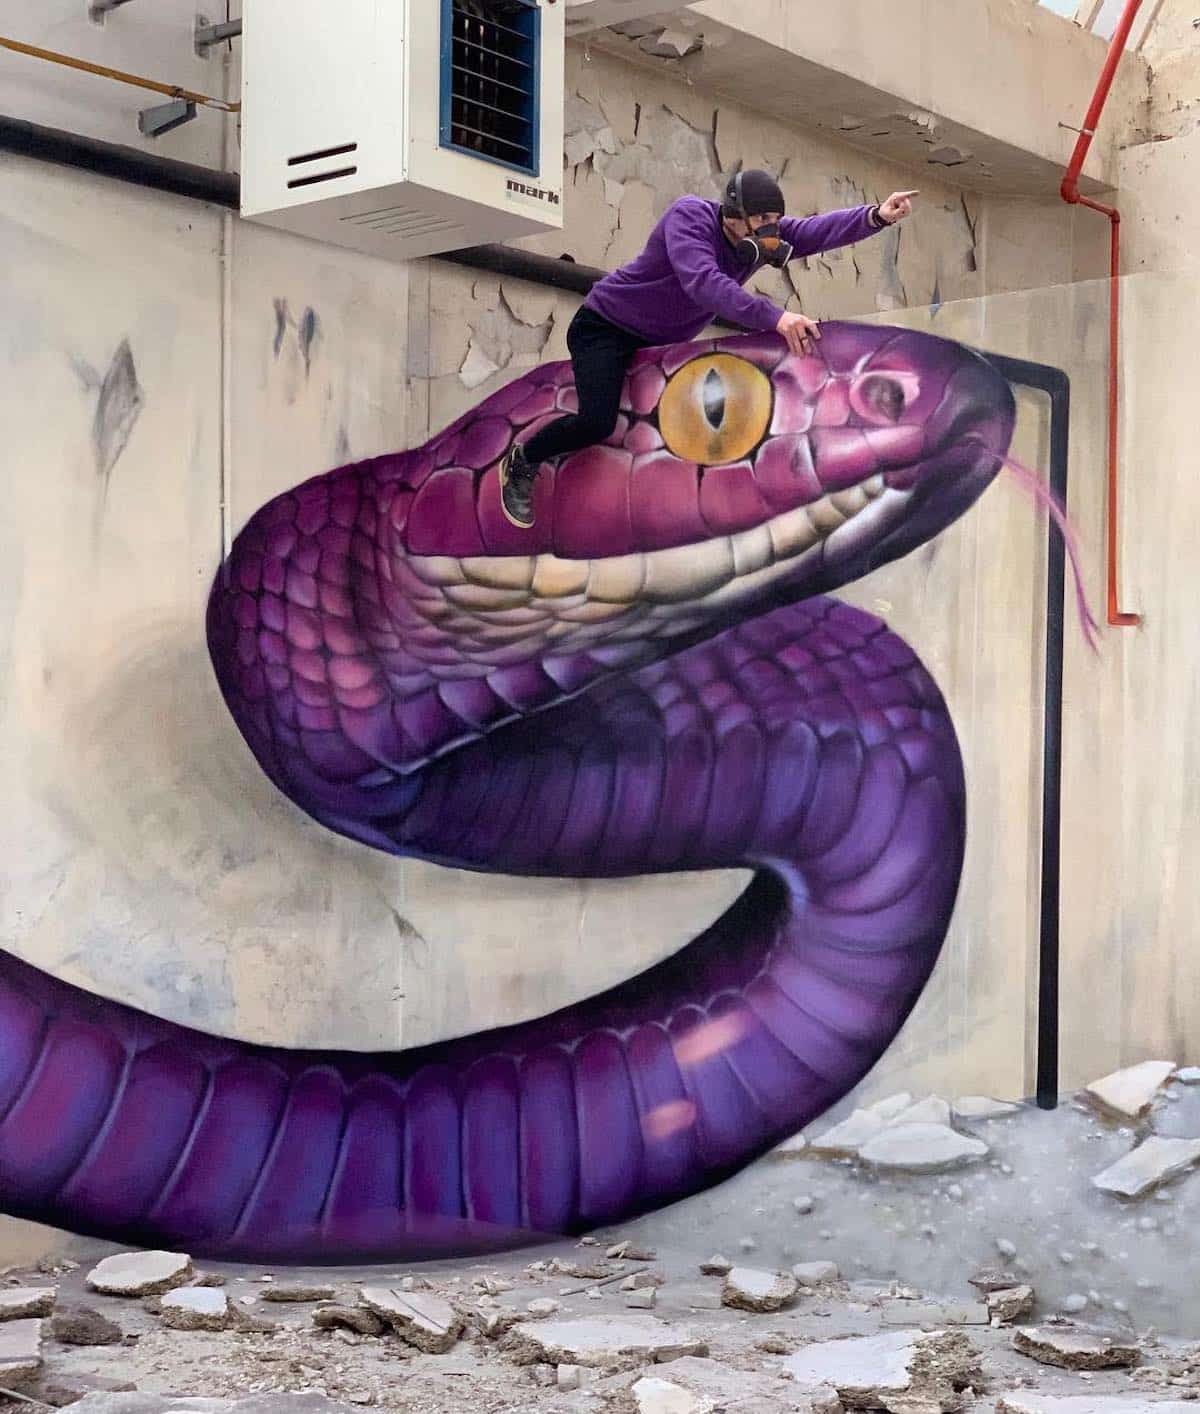 3D Mural by SCAF